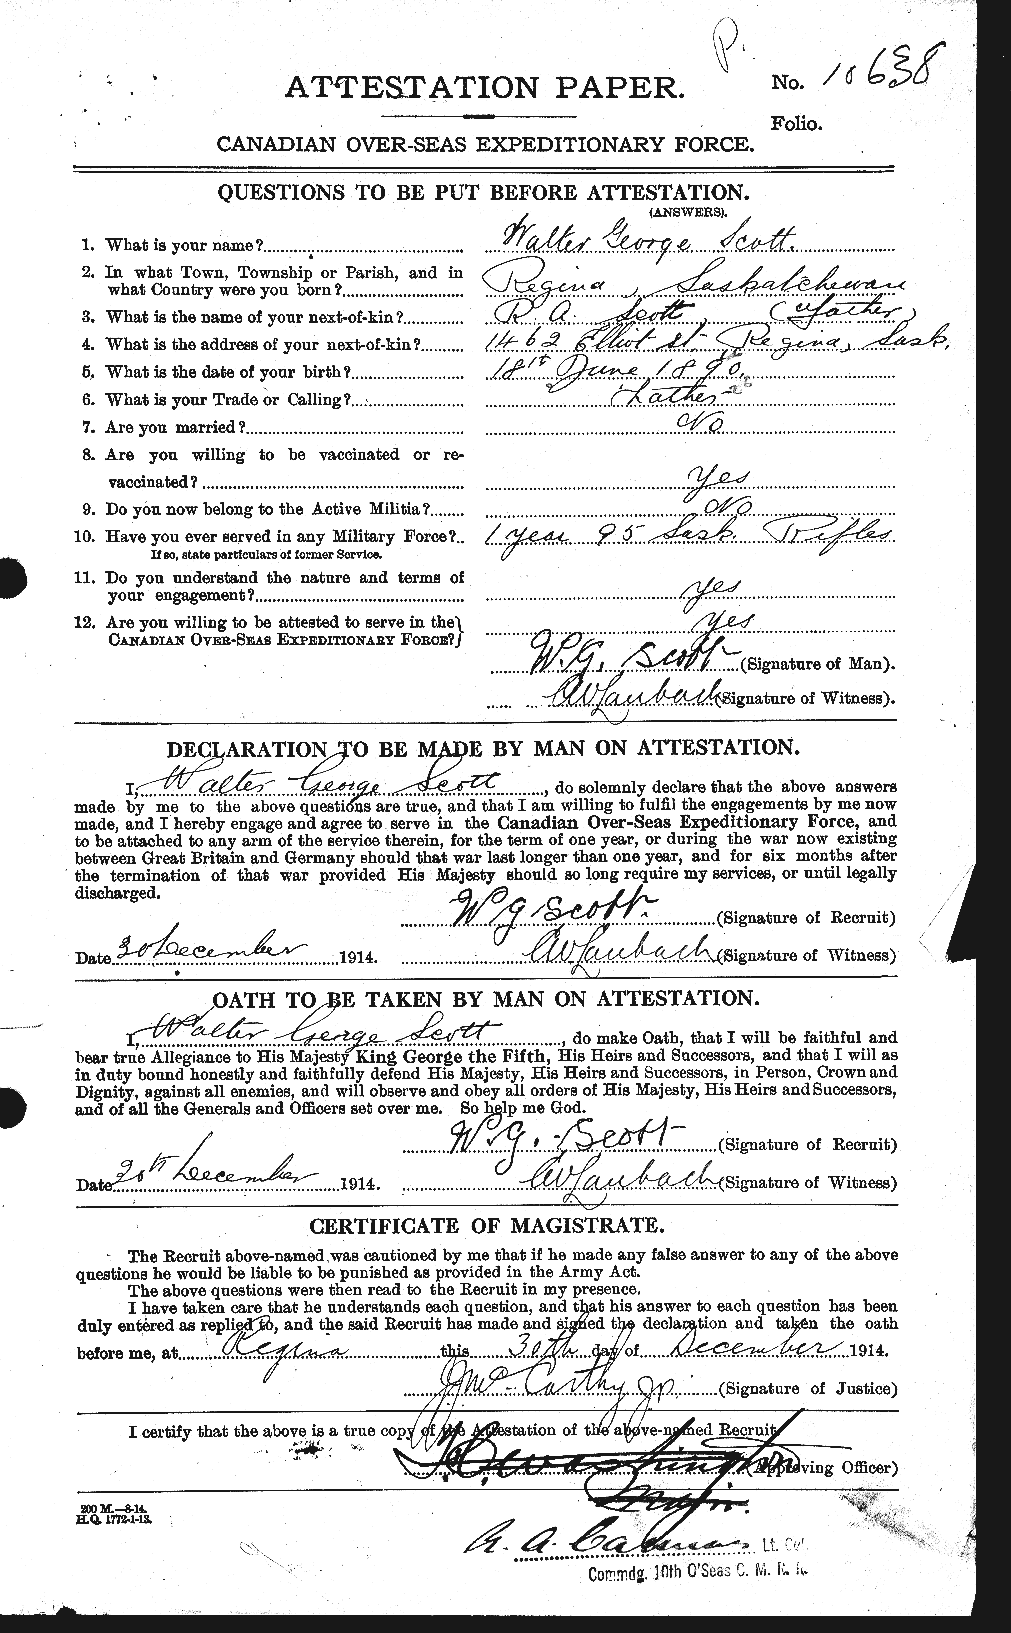 Personnel Records of the First World War - CEF 087988a